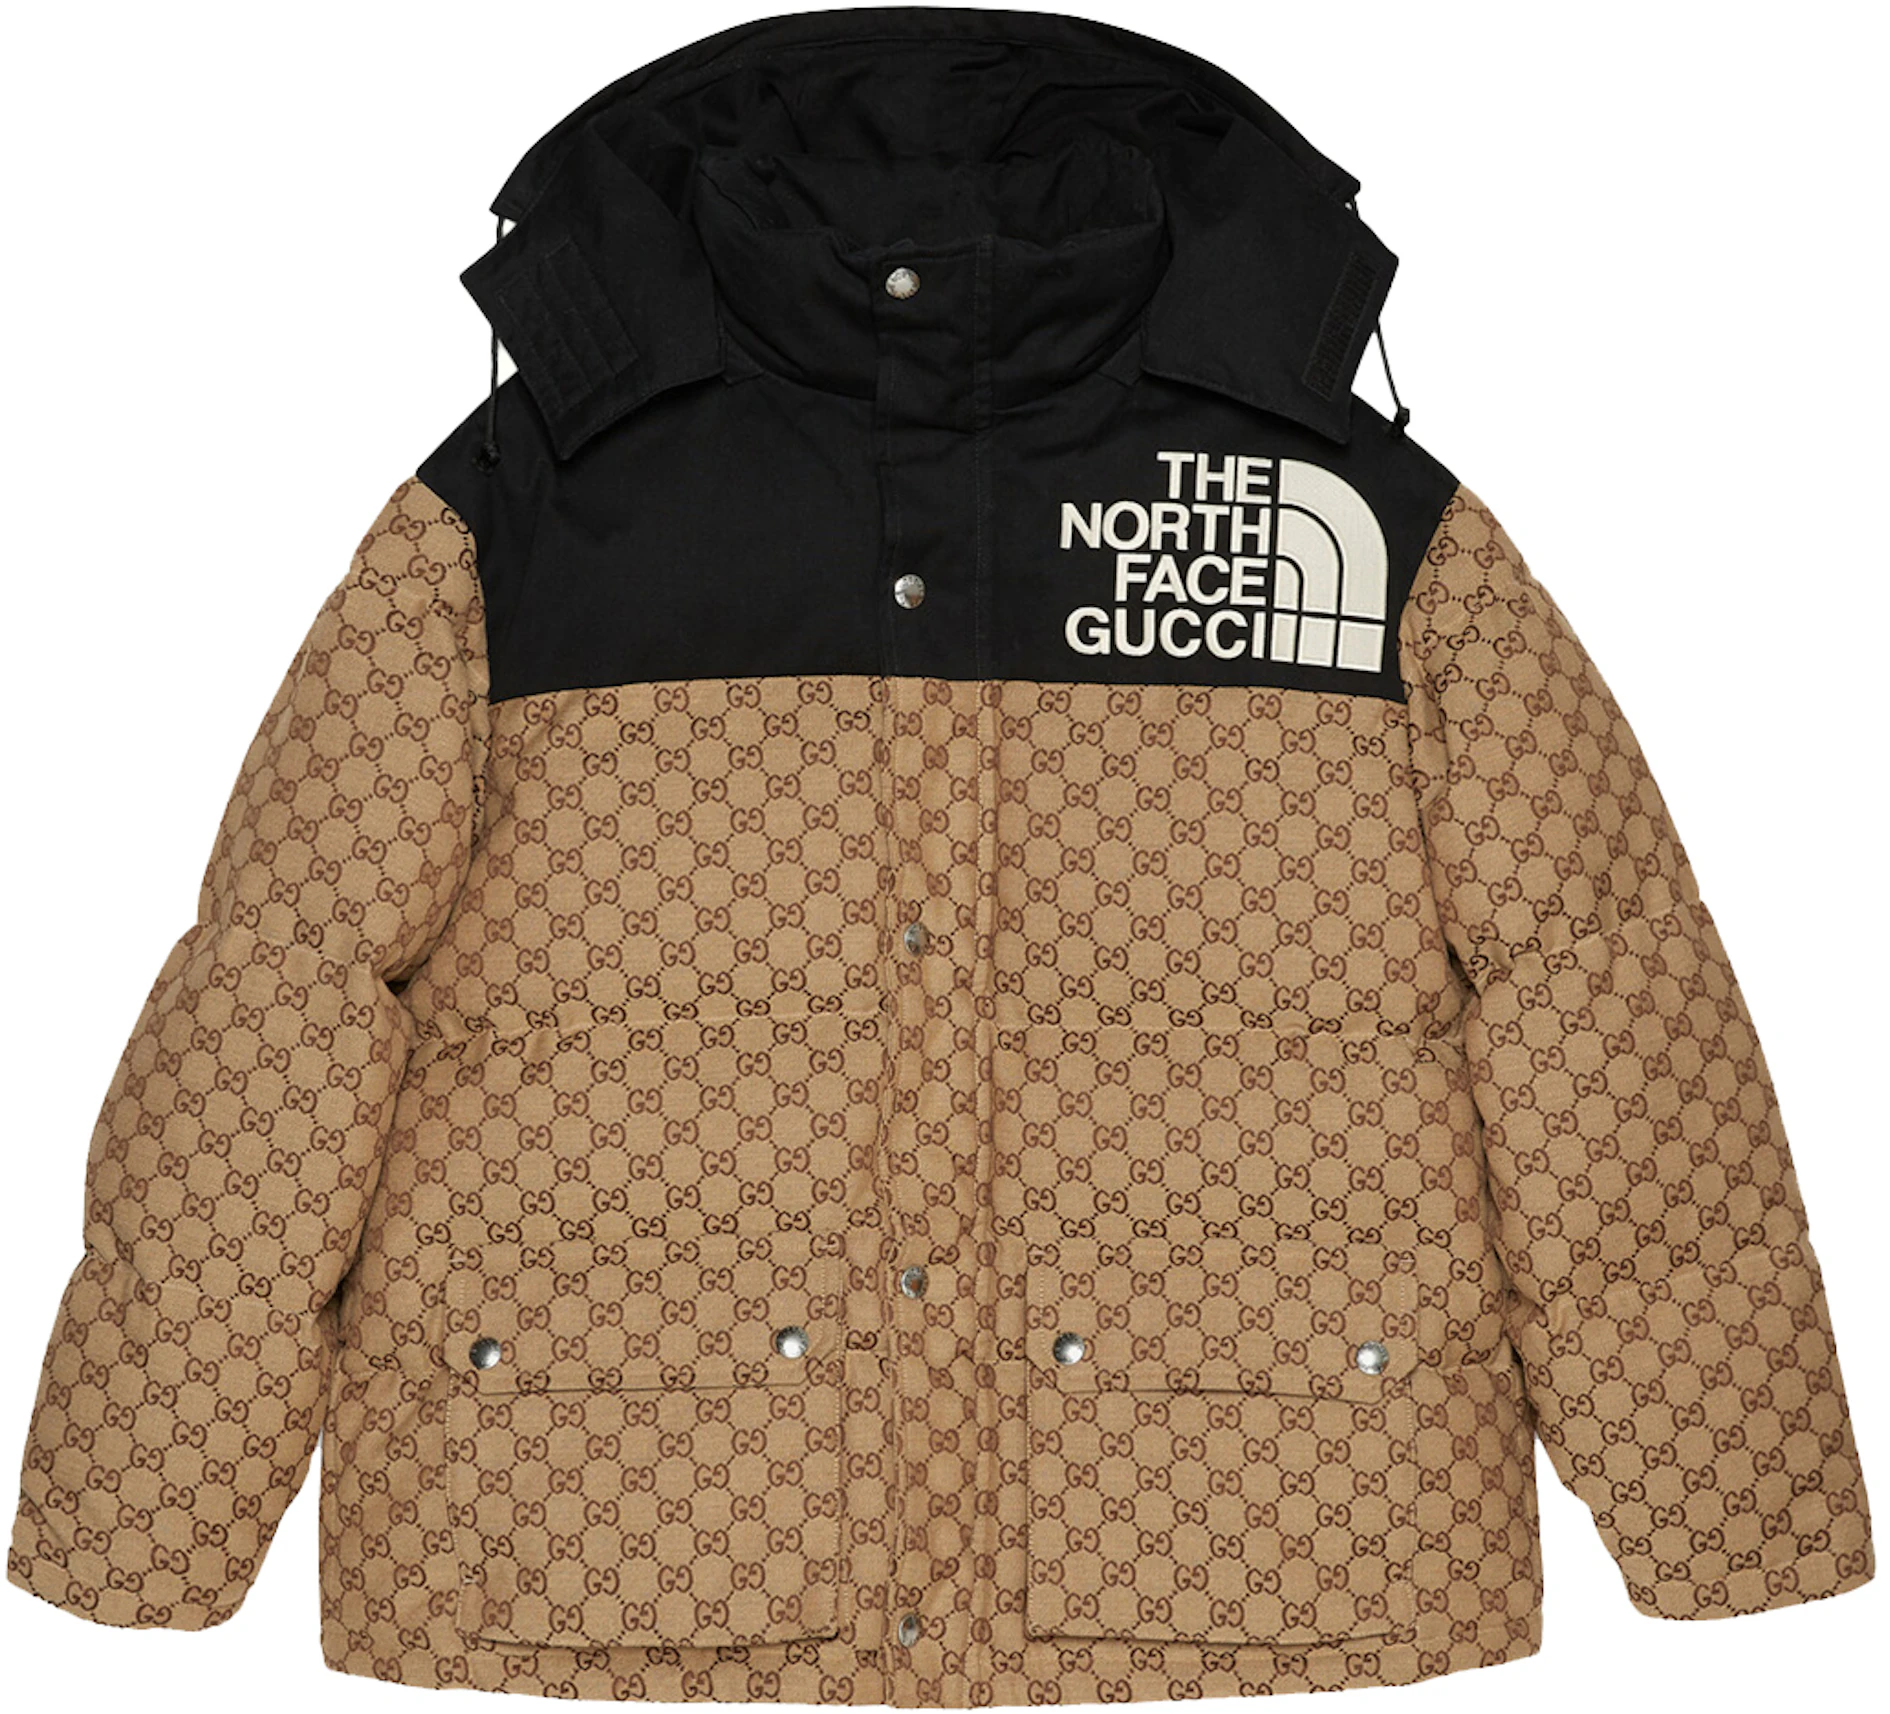 Arriba 95+ imagen gucci north face collection